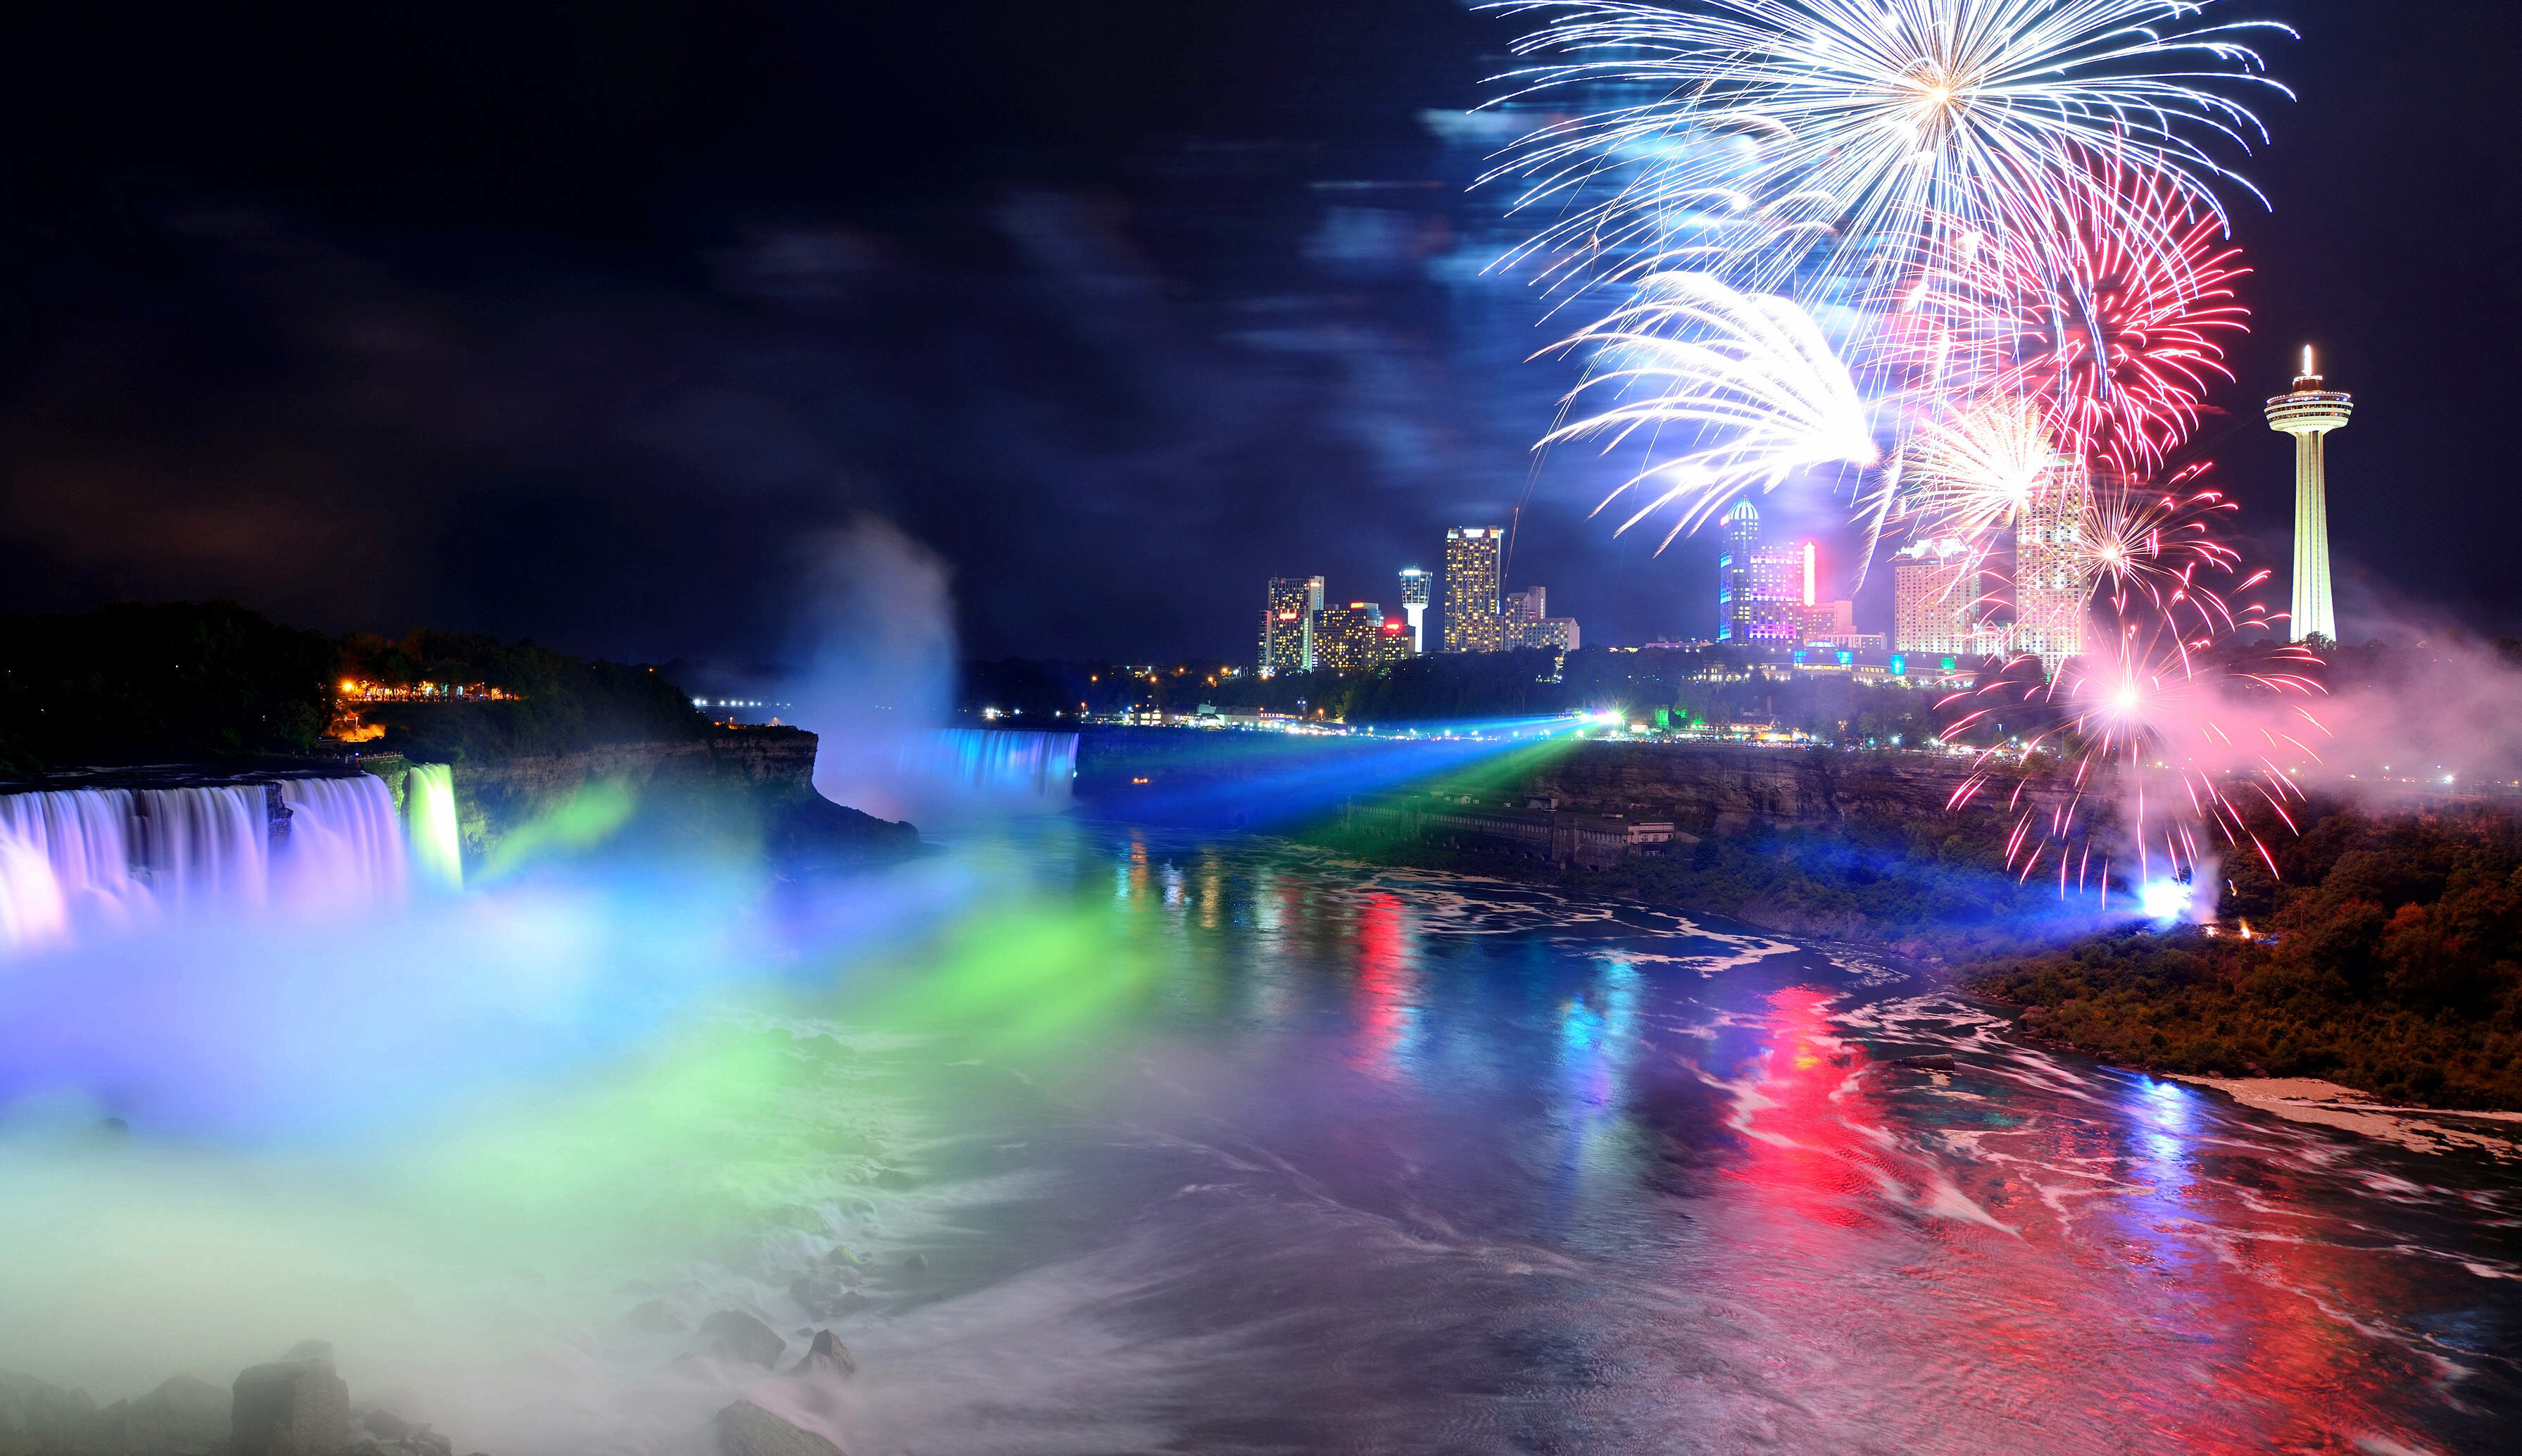 Fireworks explode in the air at night above horseshoe falls in Niagara Falls.